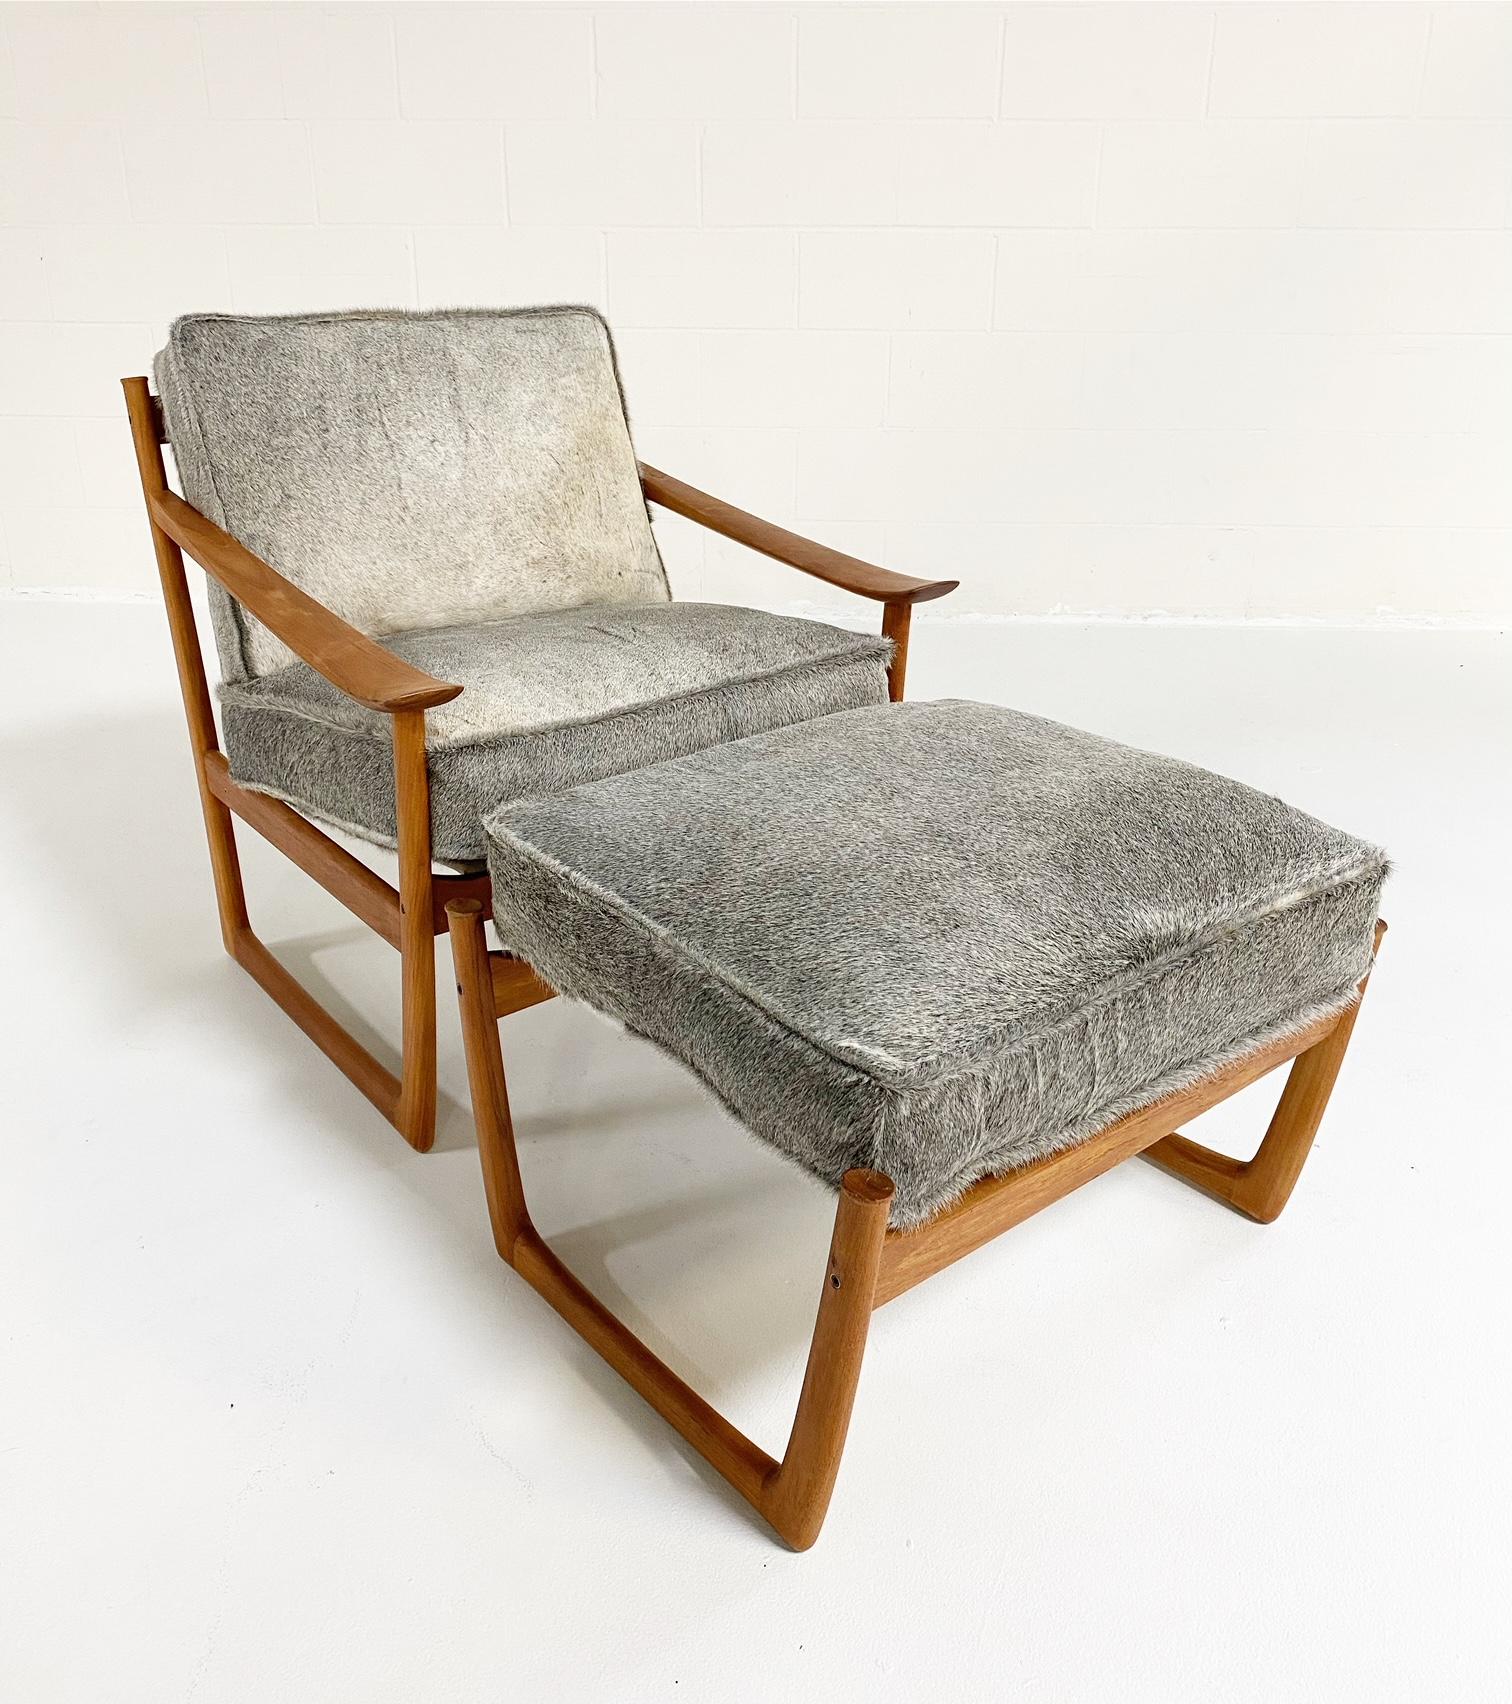 Hvidt & Mølgaard was a Copenhagen-based, Danish design and architectural firm which existed from 1944 until 2009. Founded by Peter Hvidt and Orla Mølgaard-Nielsen, the company was a pioneering force in Danish furniture design and industrialized